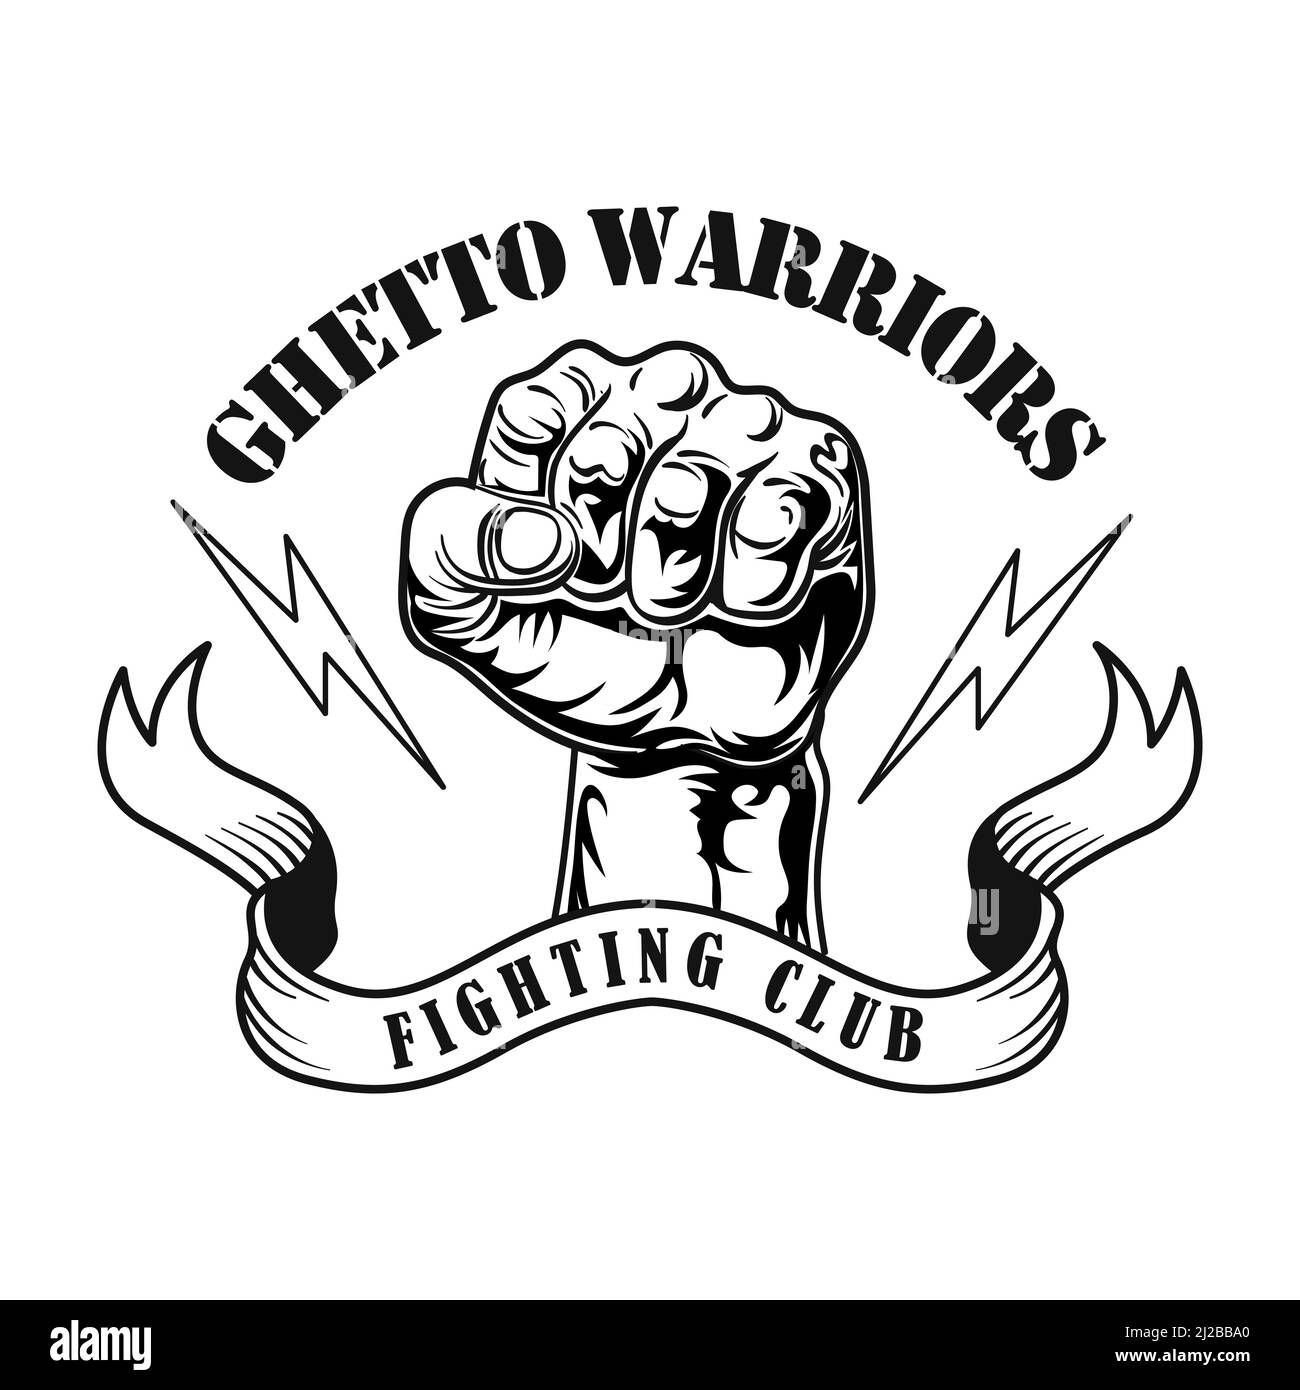 Ghetto warriors symbol vector illustration. Male fist with lightning, text on ribbon. Lifestyle concept for fight club emblem or gangsta tattoo templa Stock Vector